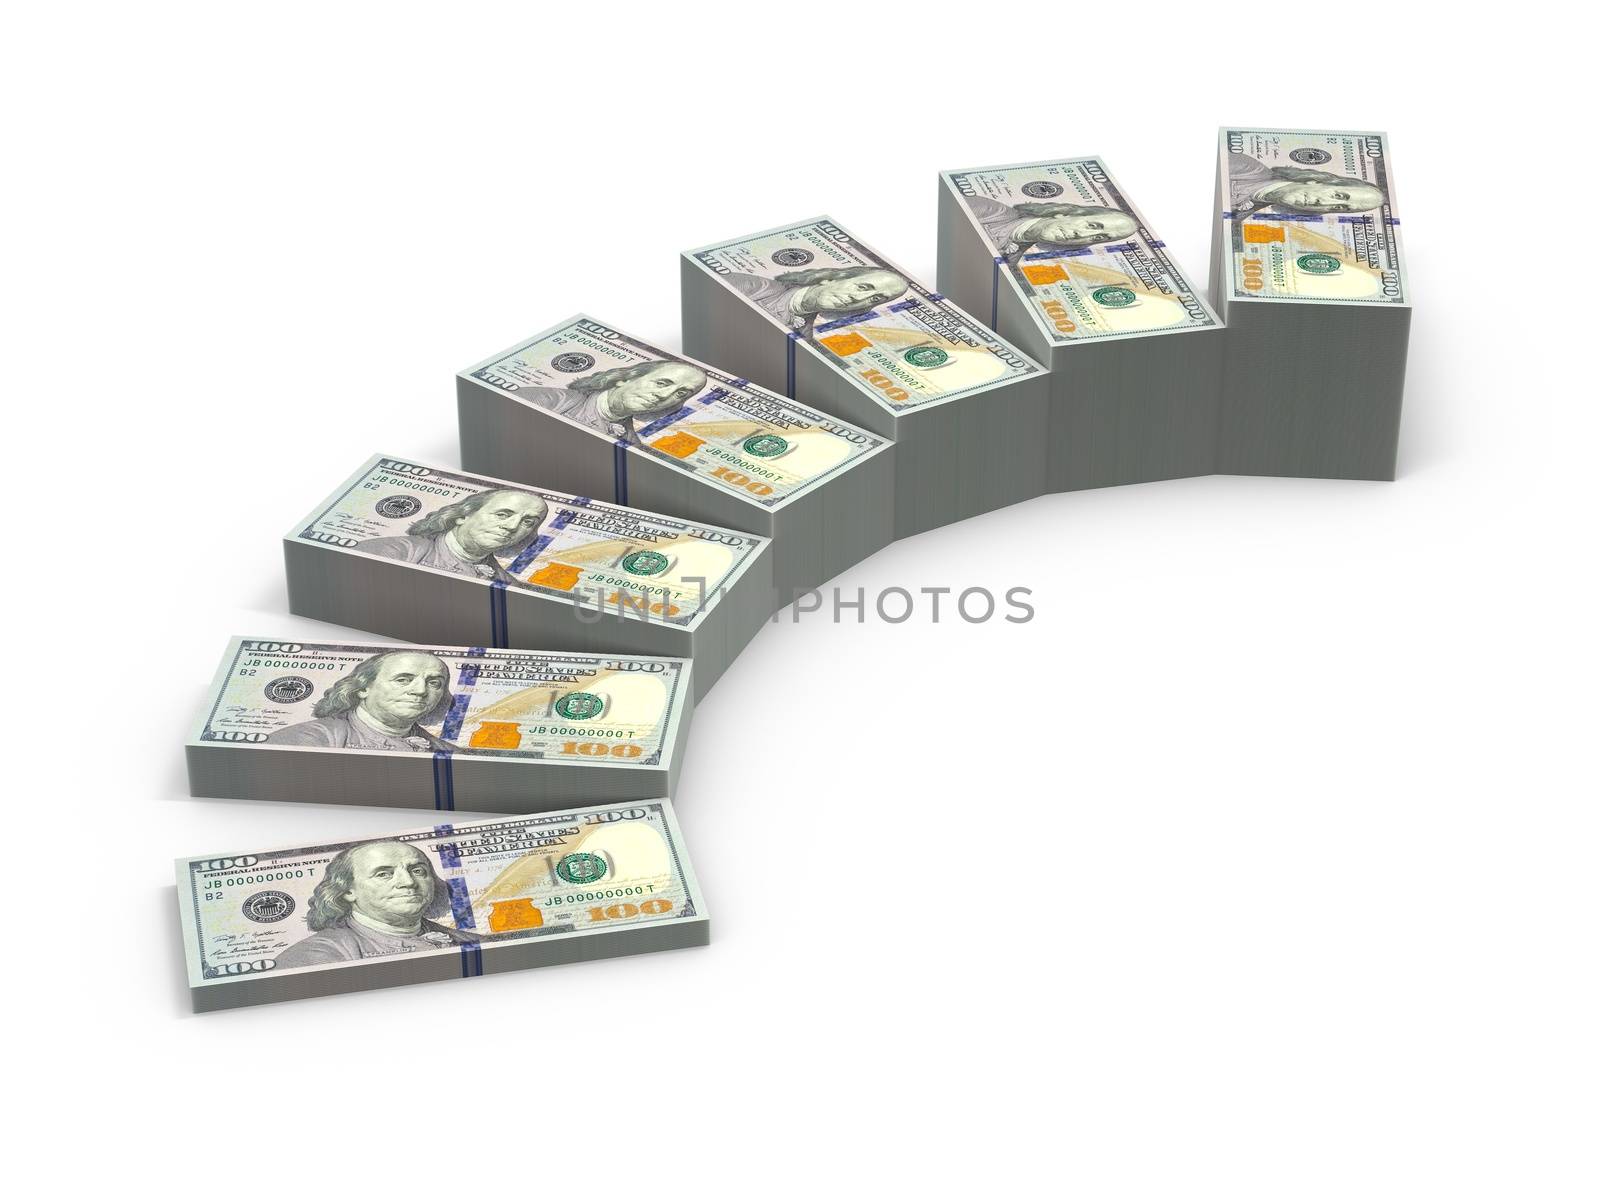 Stairs from stacks of money by Polakx